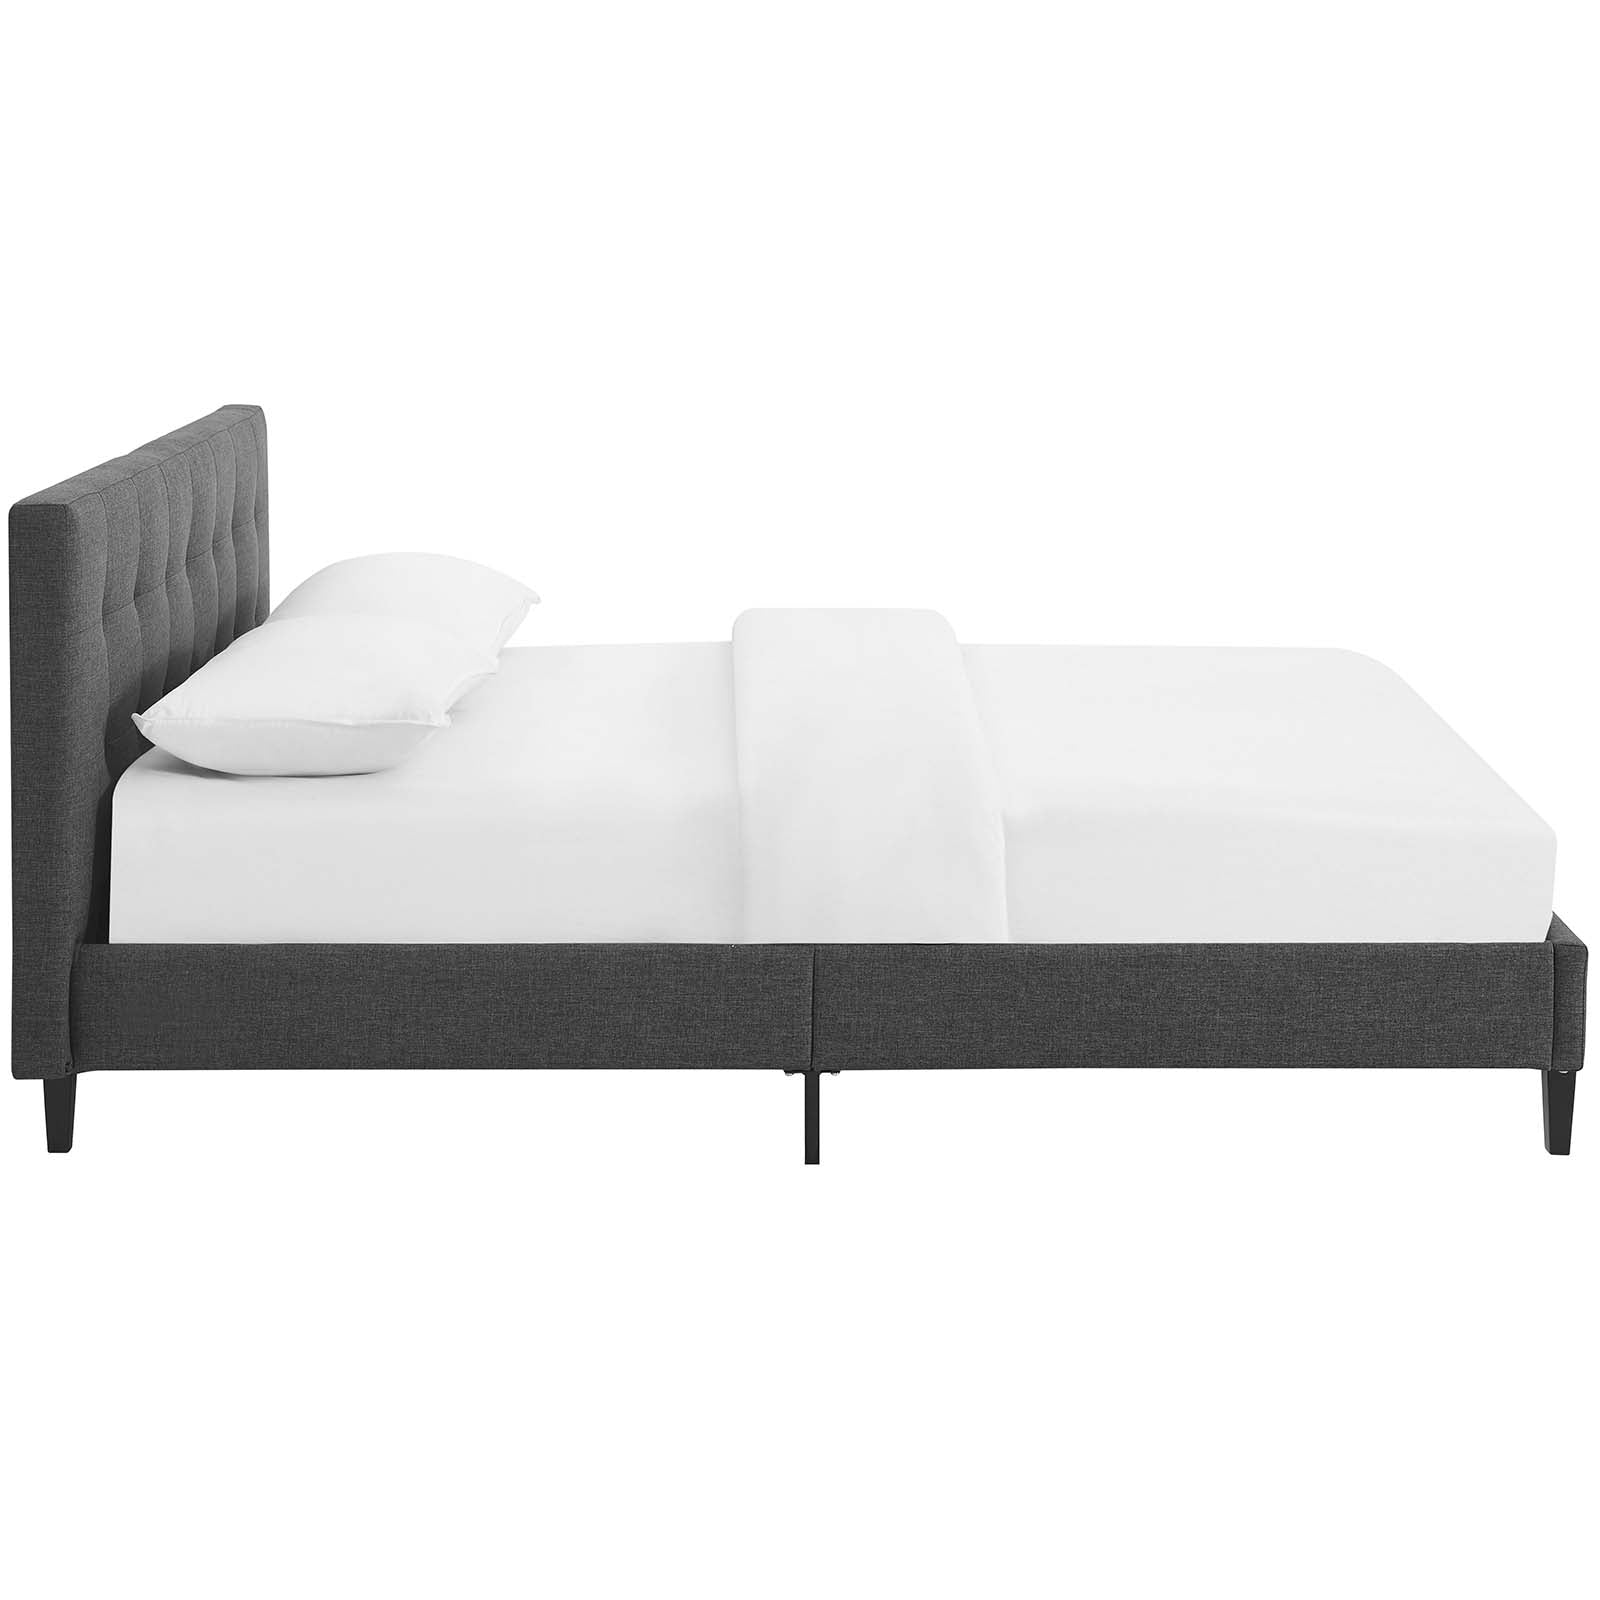 Modway Beds - Linnea Full Bed Gray